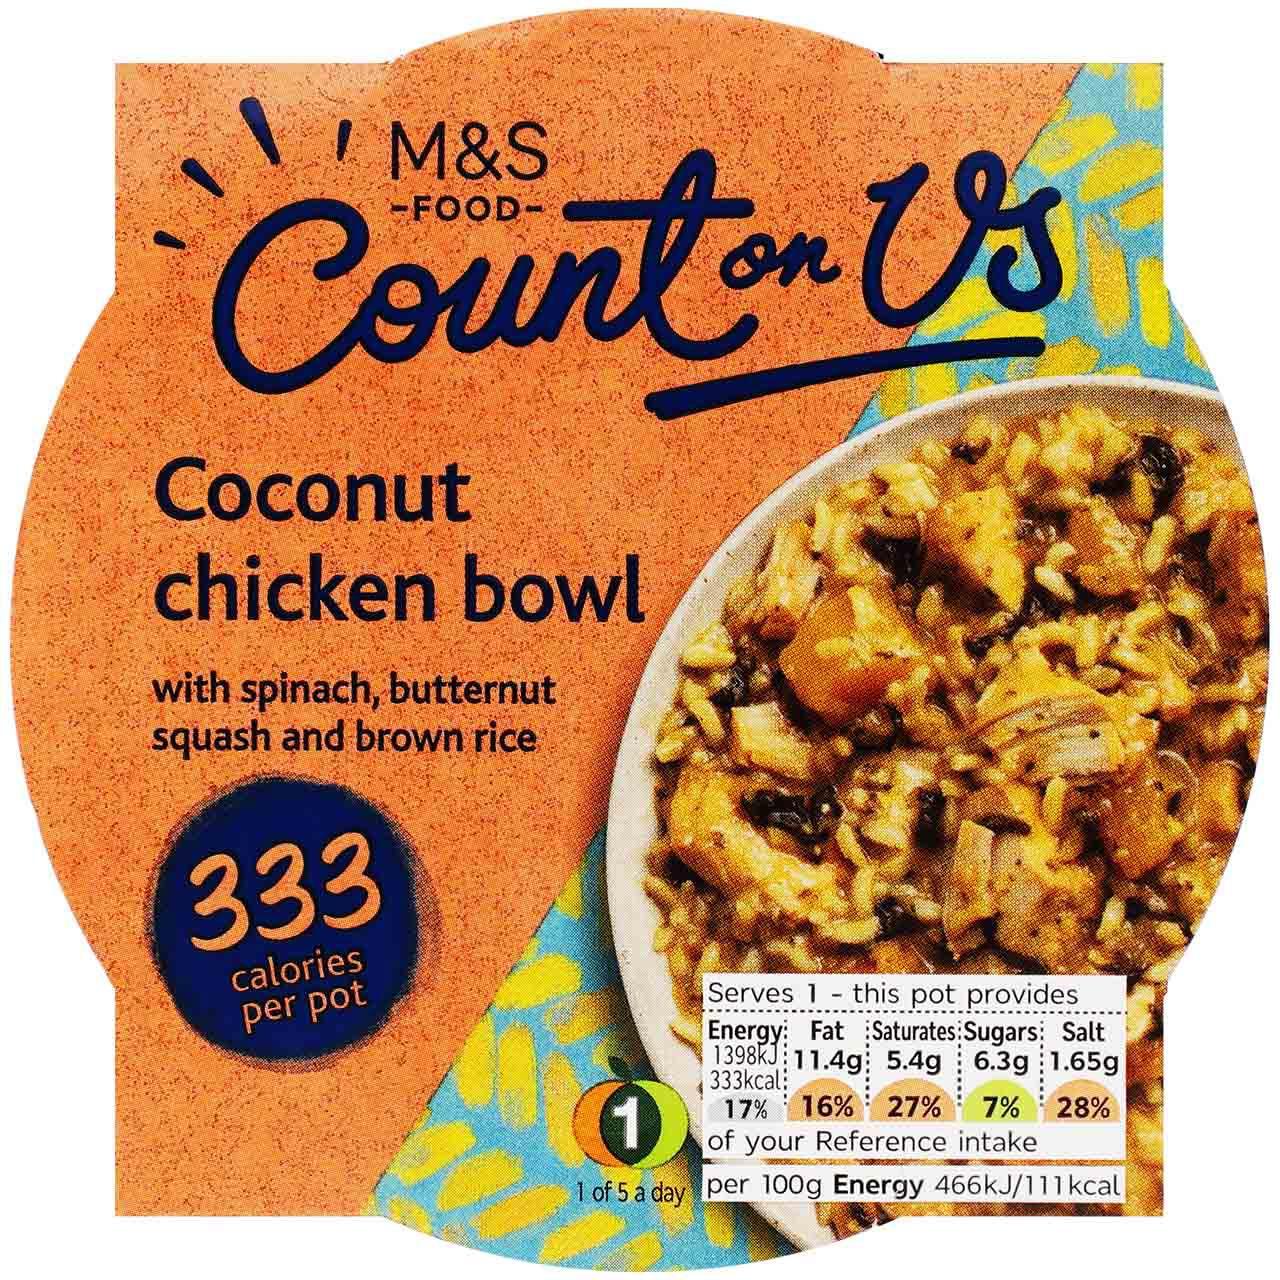 M&S Balanced For You Coconut Chicken Bowl 300g